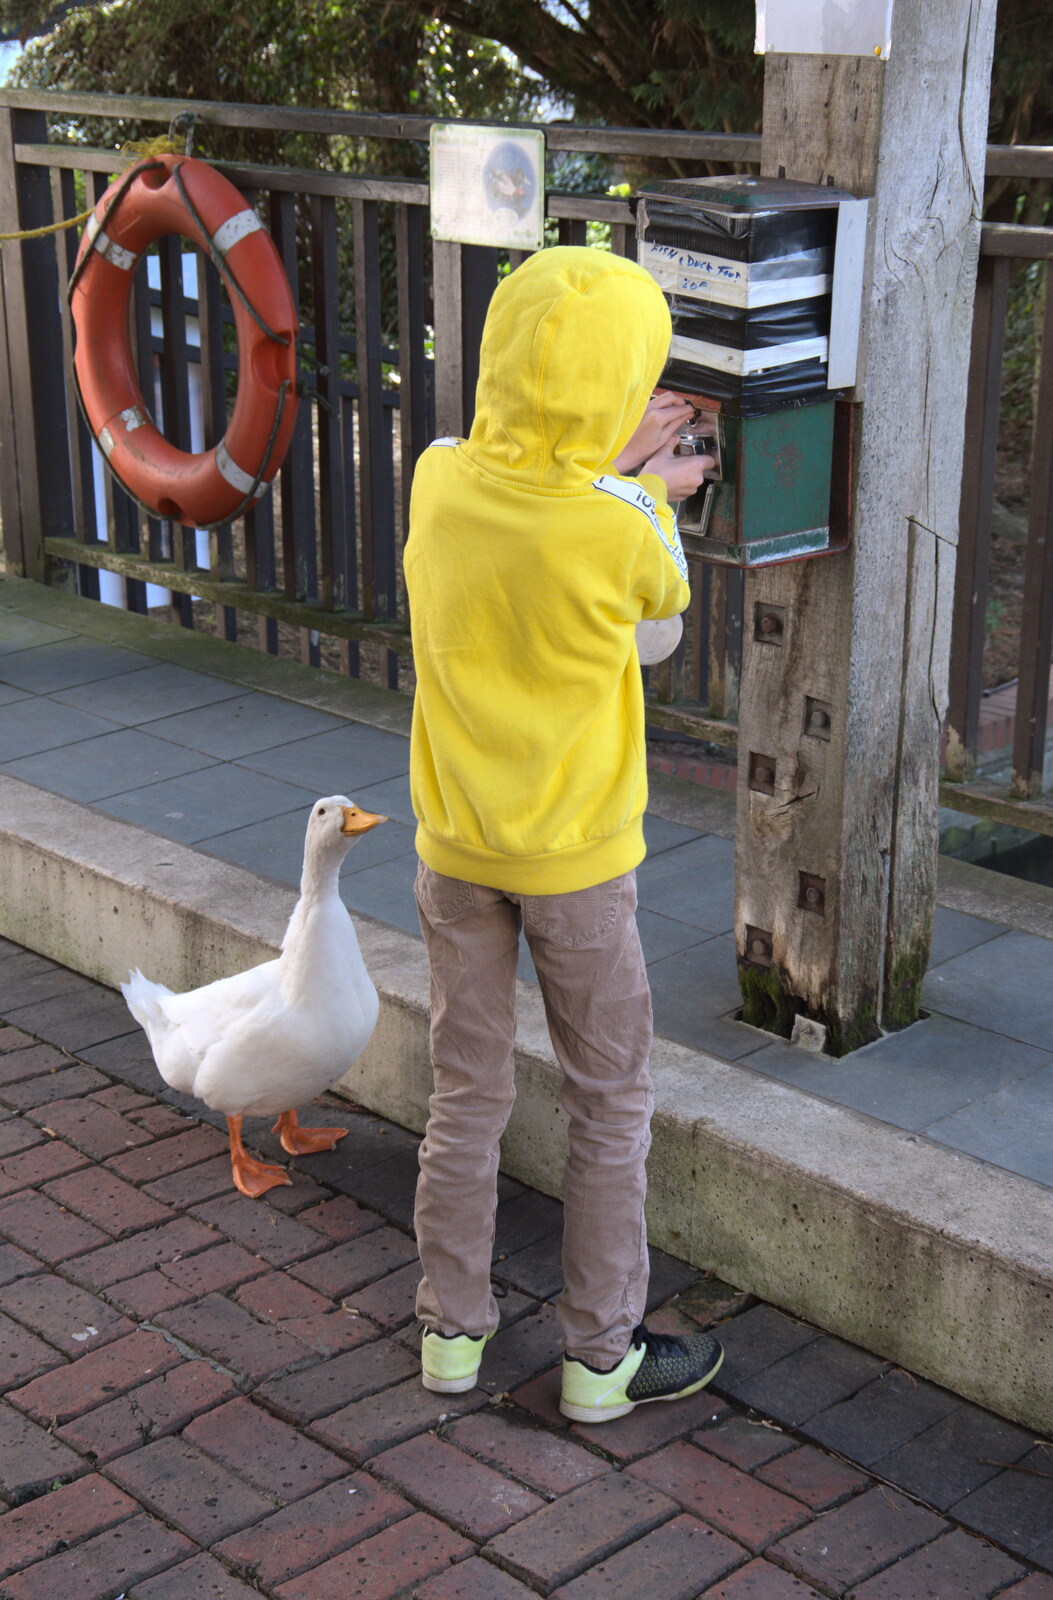 Harry gets more food for a hopeful duck from HMS Belfast and the South Bank, Southwark, London - 17th February 2020